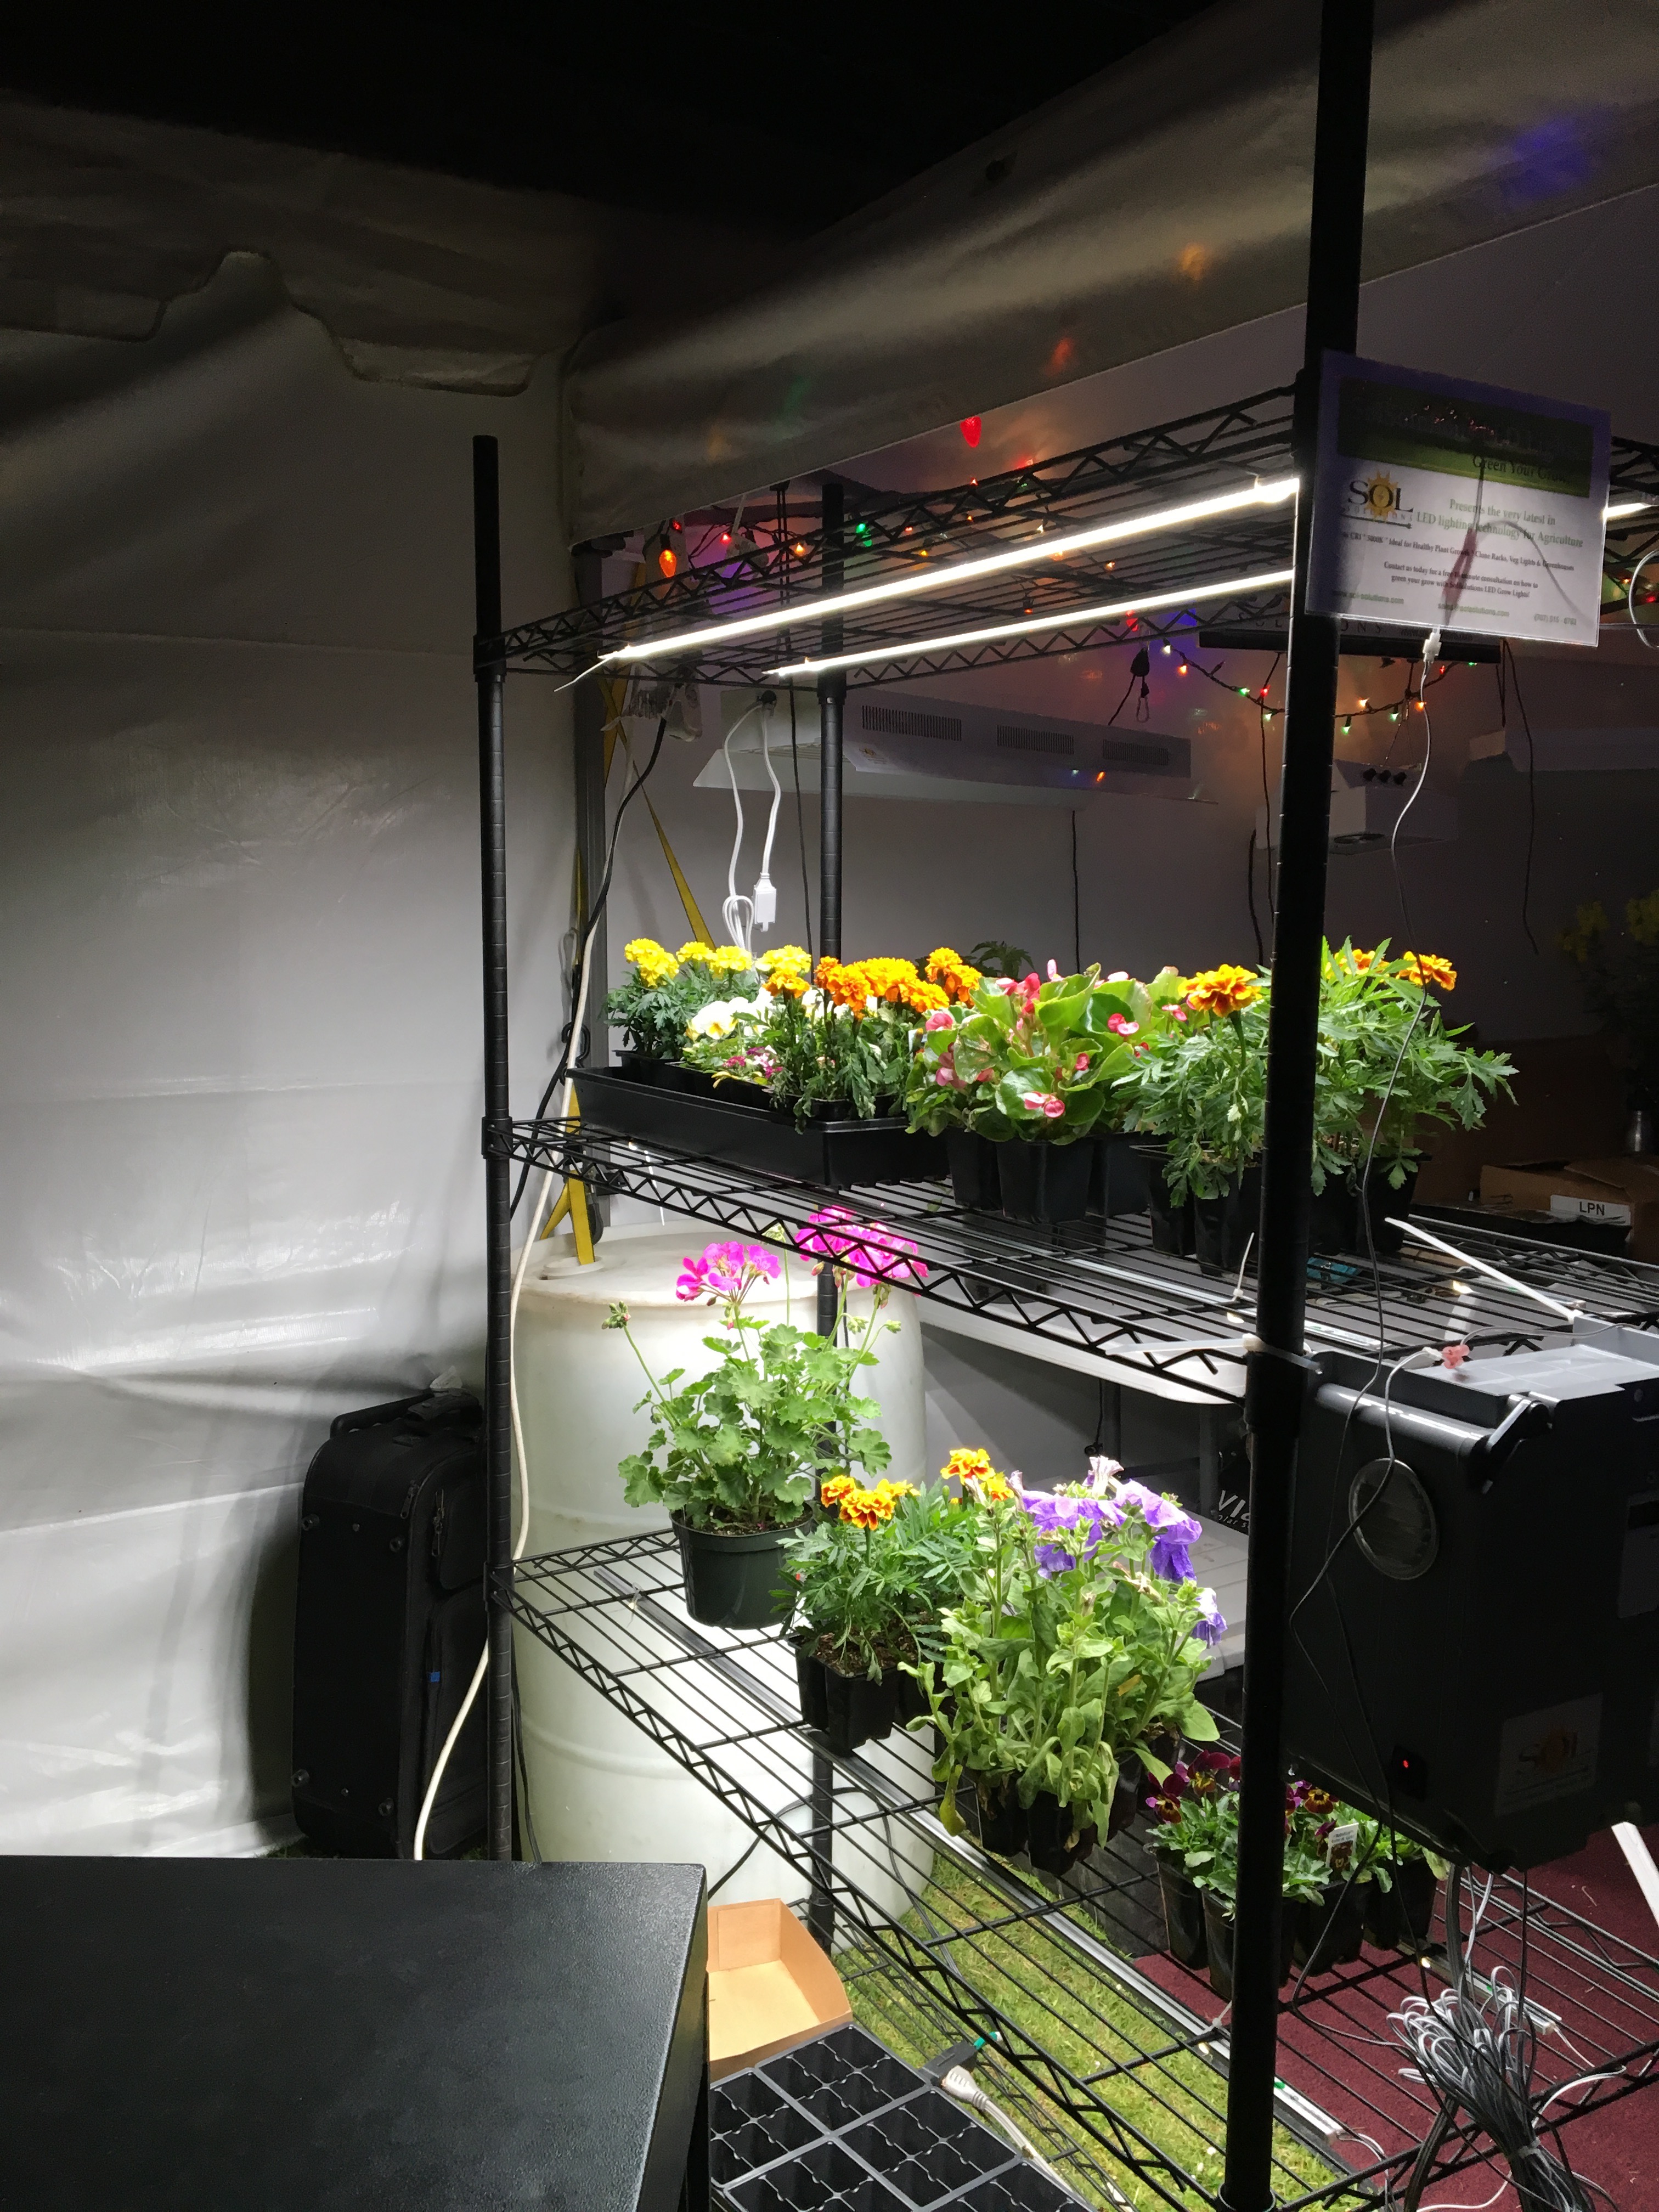 Solar & LEDs for New Closed Loop Agriculture